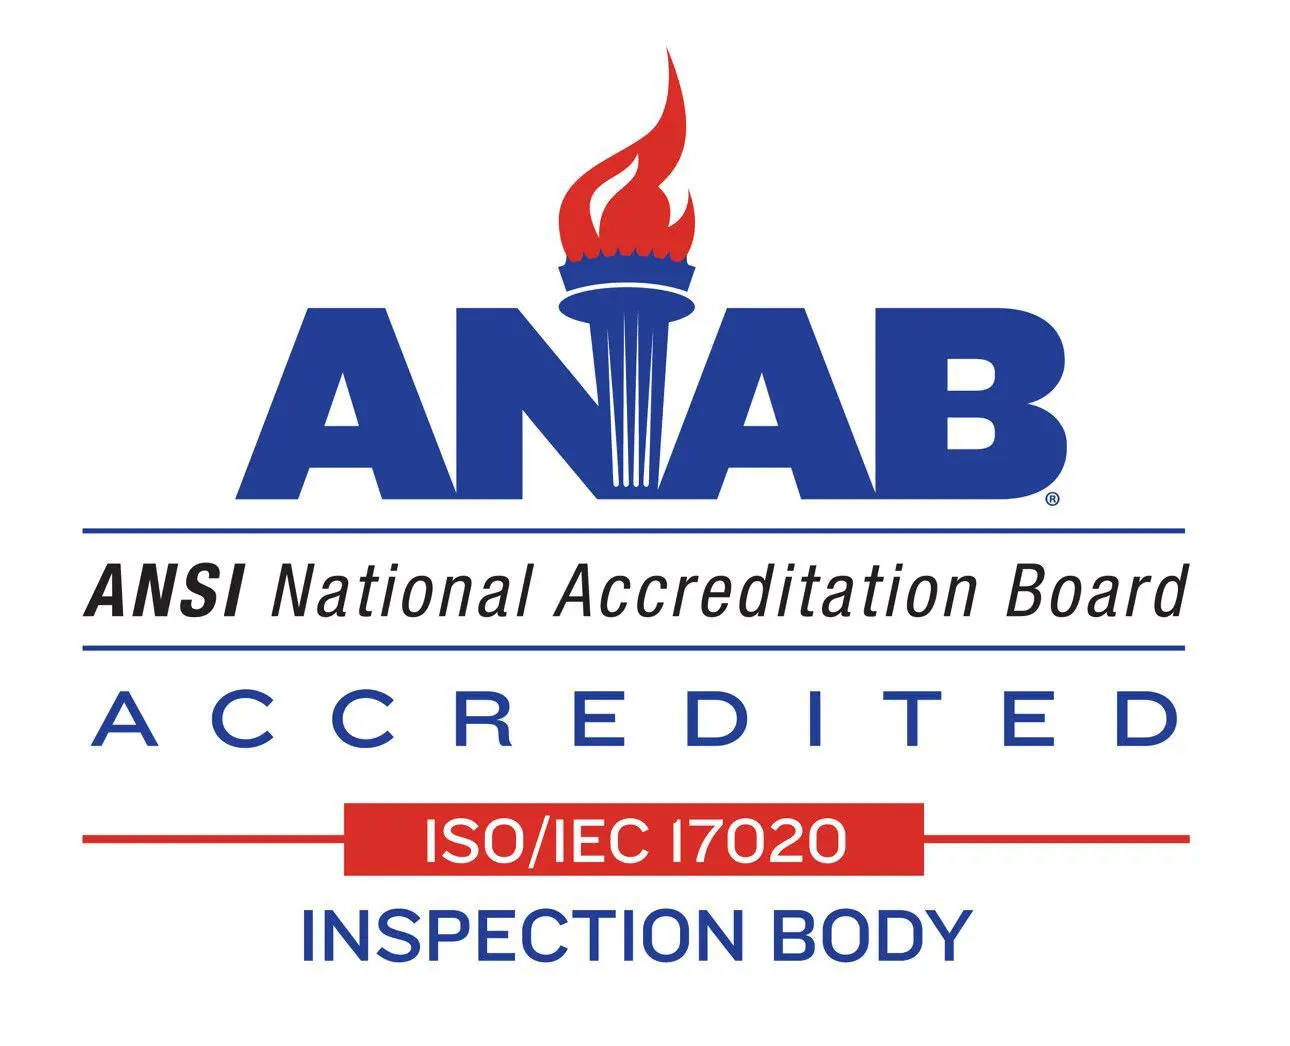 Anab accredited logo with a fire hydrant